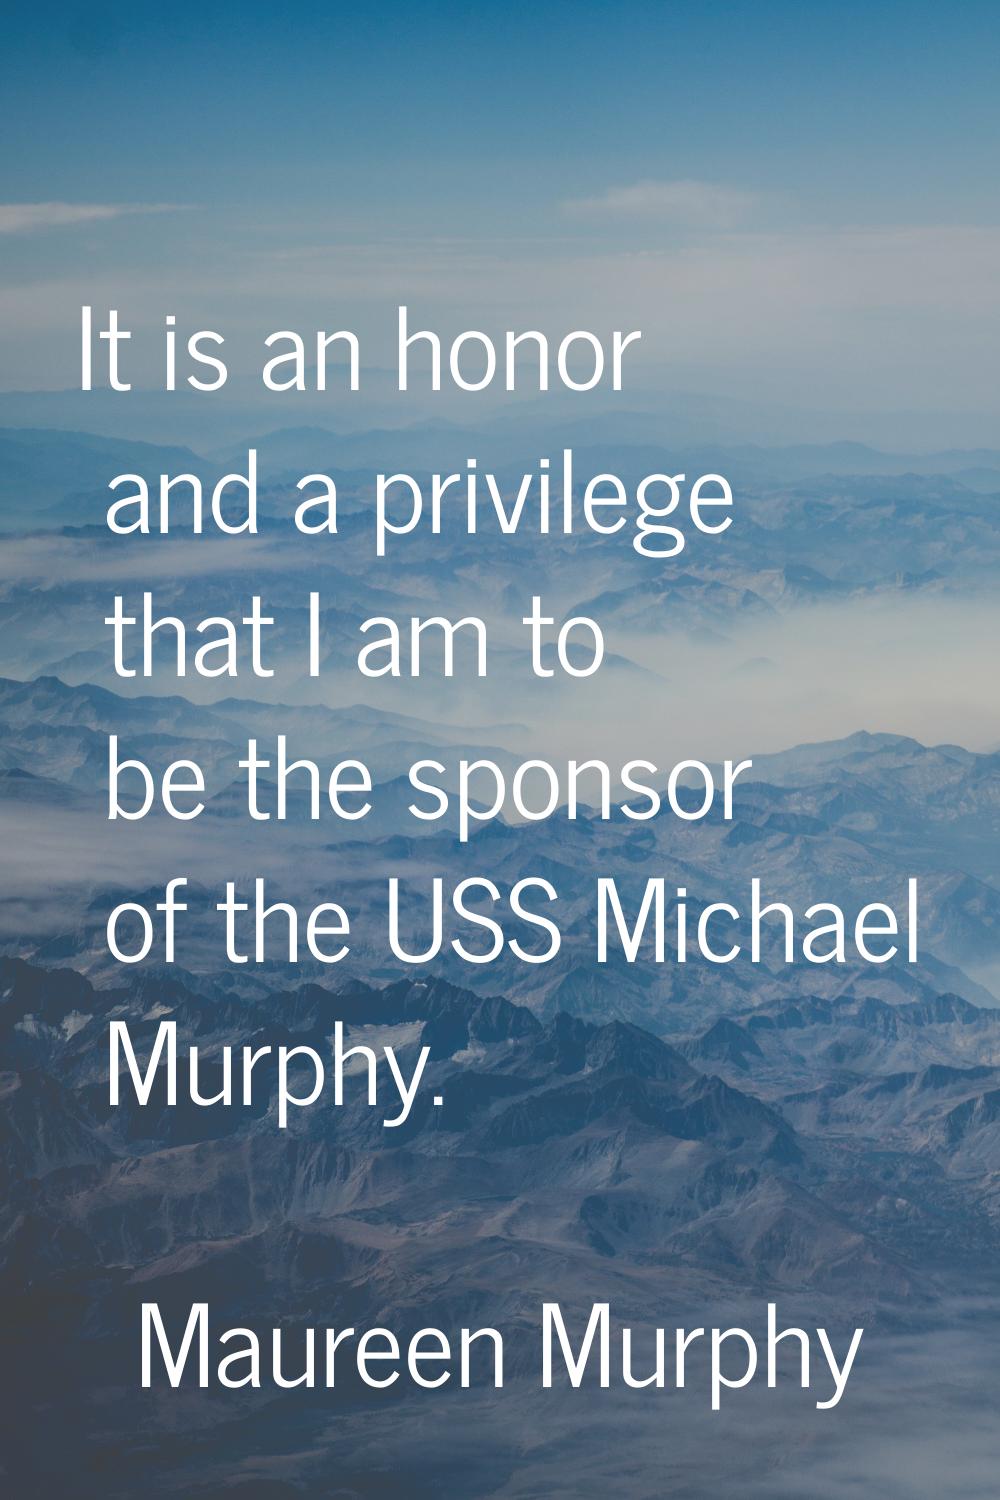 It is an honor and a privilege that I am to be the sponsor of the USS Michael Murphy.